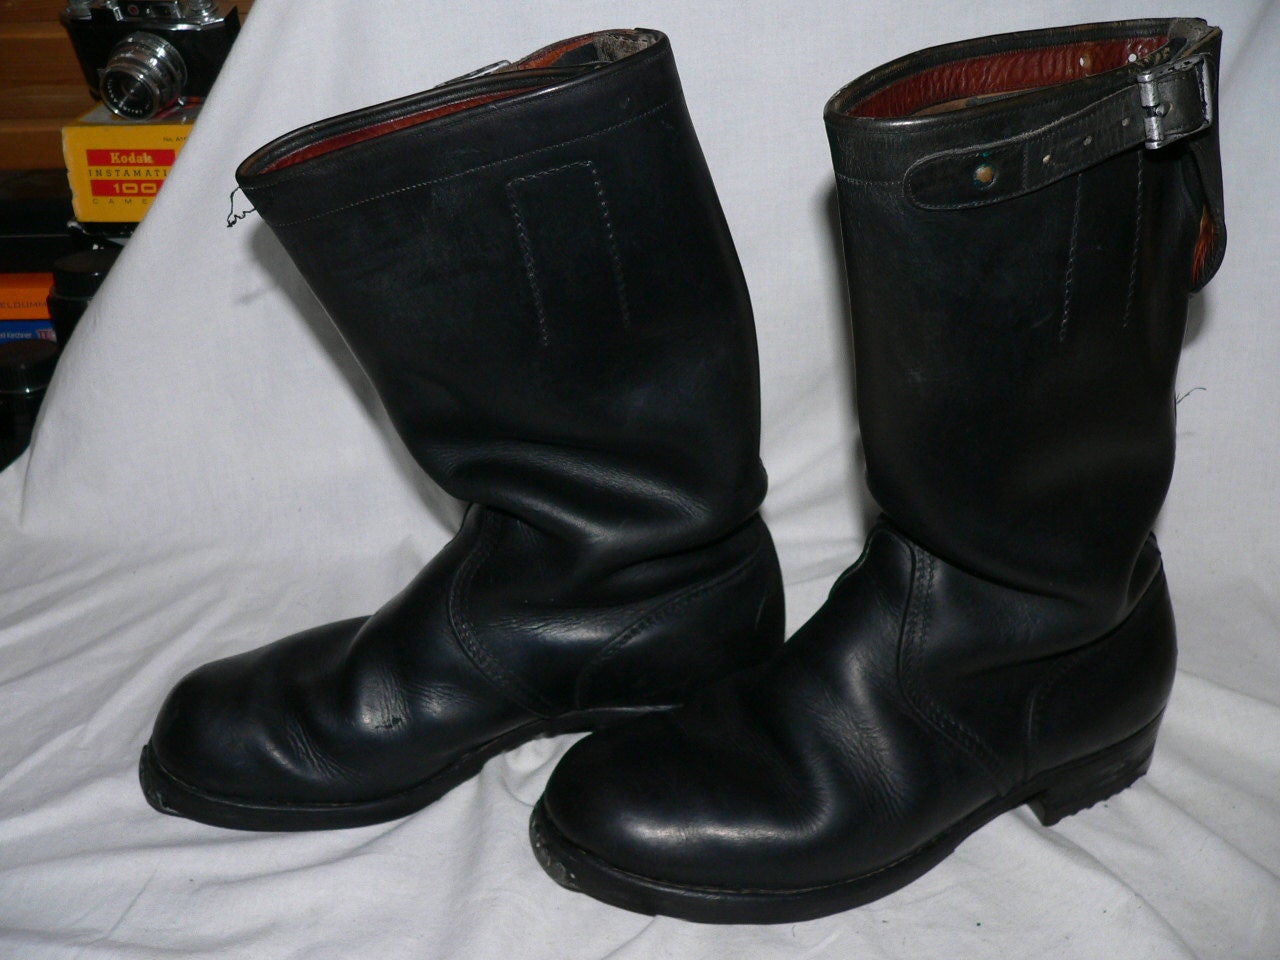 West german army Bundeswehr boots Size 42/8 1950-80s